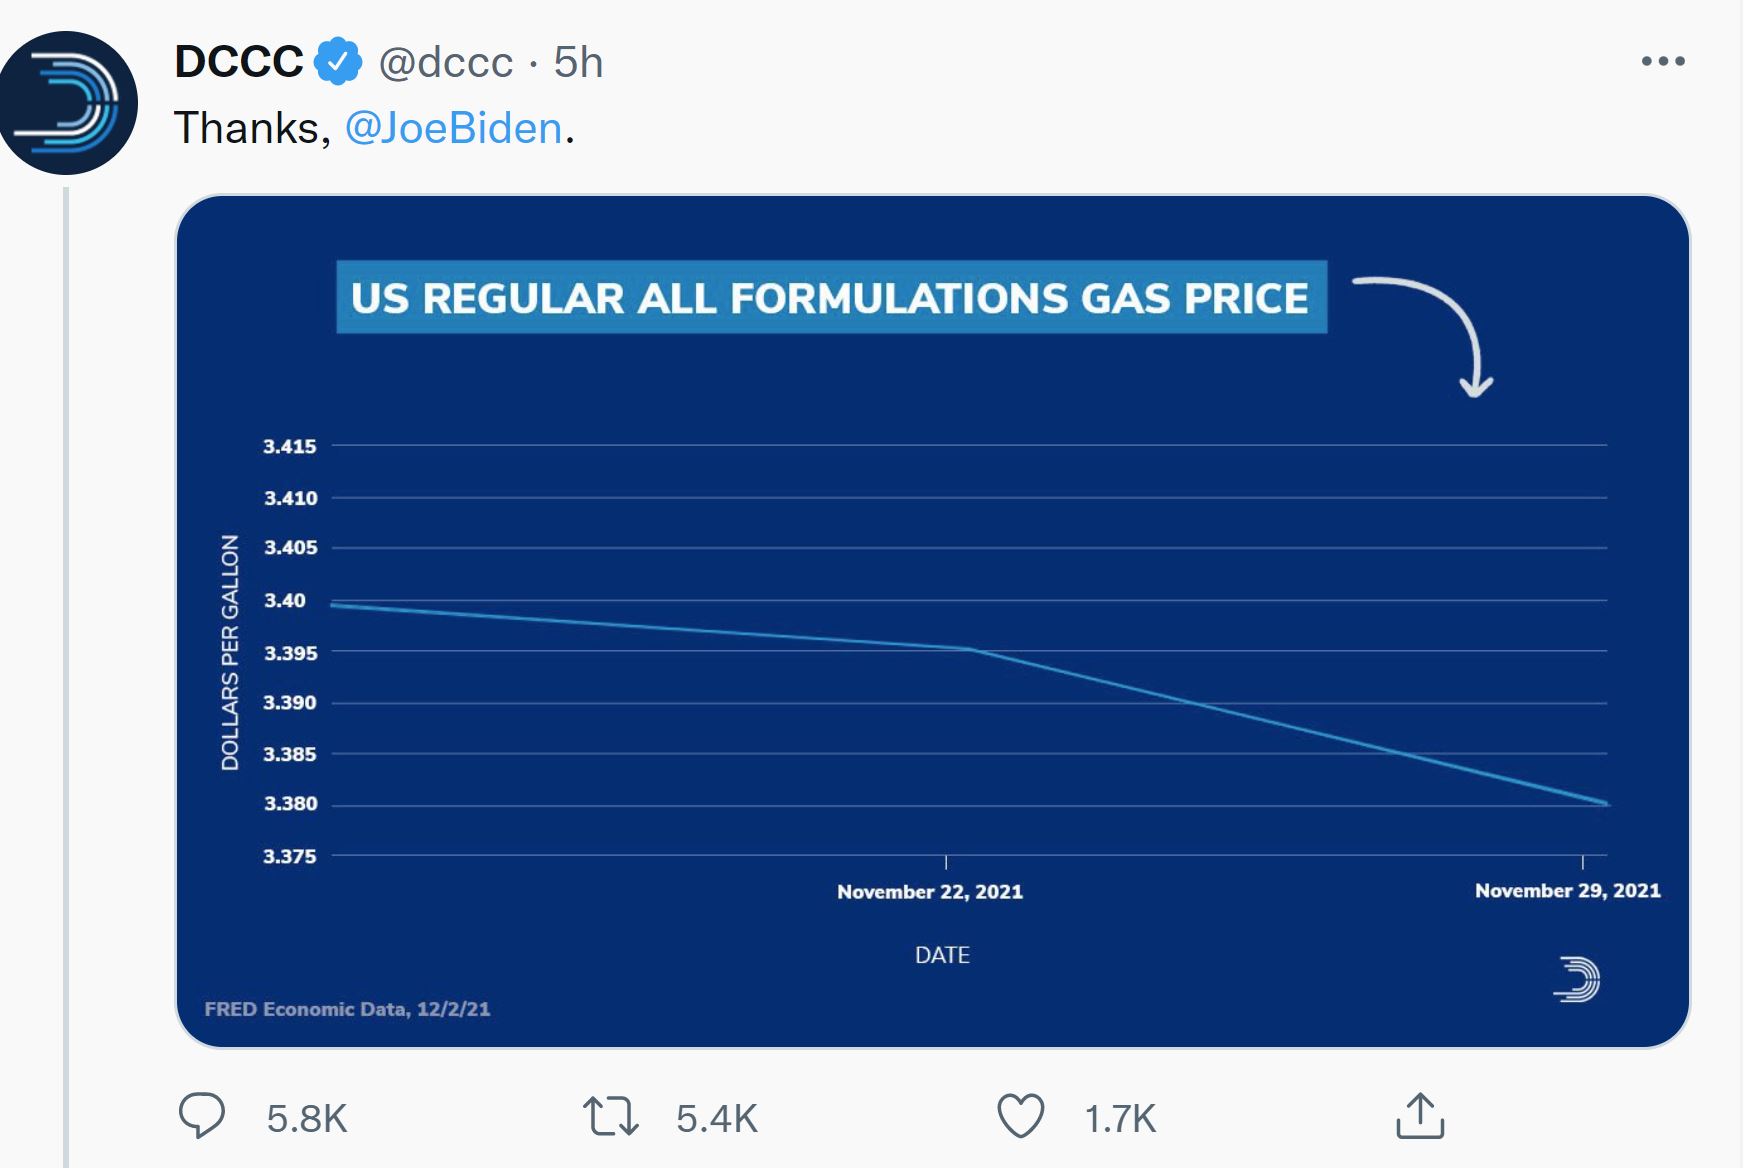 House Democrats Roasted on Twitter After Thanking Biden for Two-Cent Drop in Gas Prices: ‘I Can’t Believe This Tweet Is Still Up’